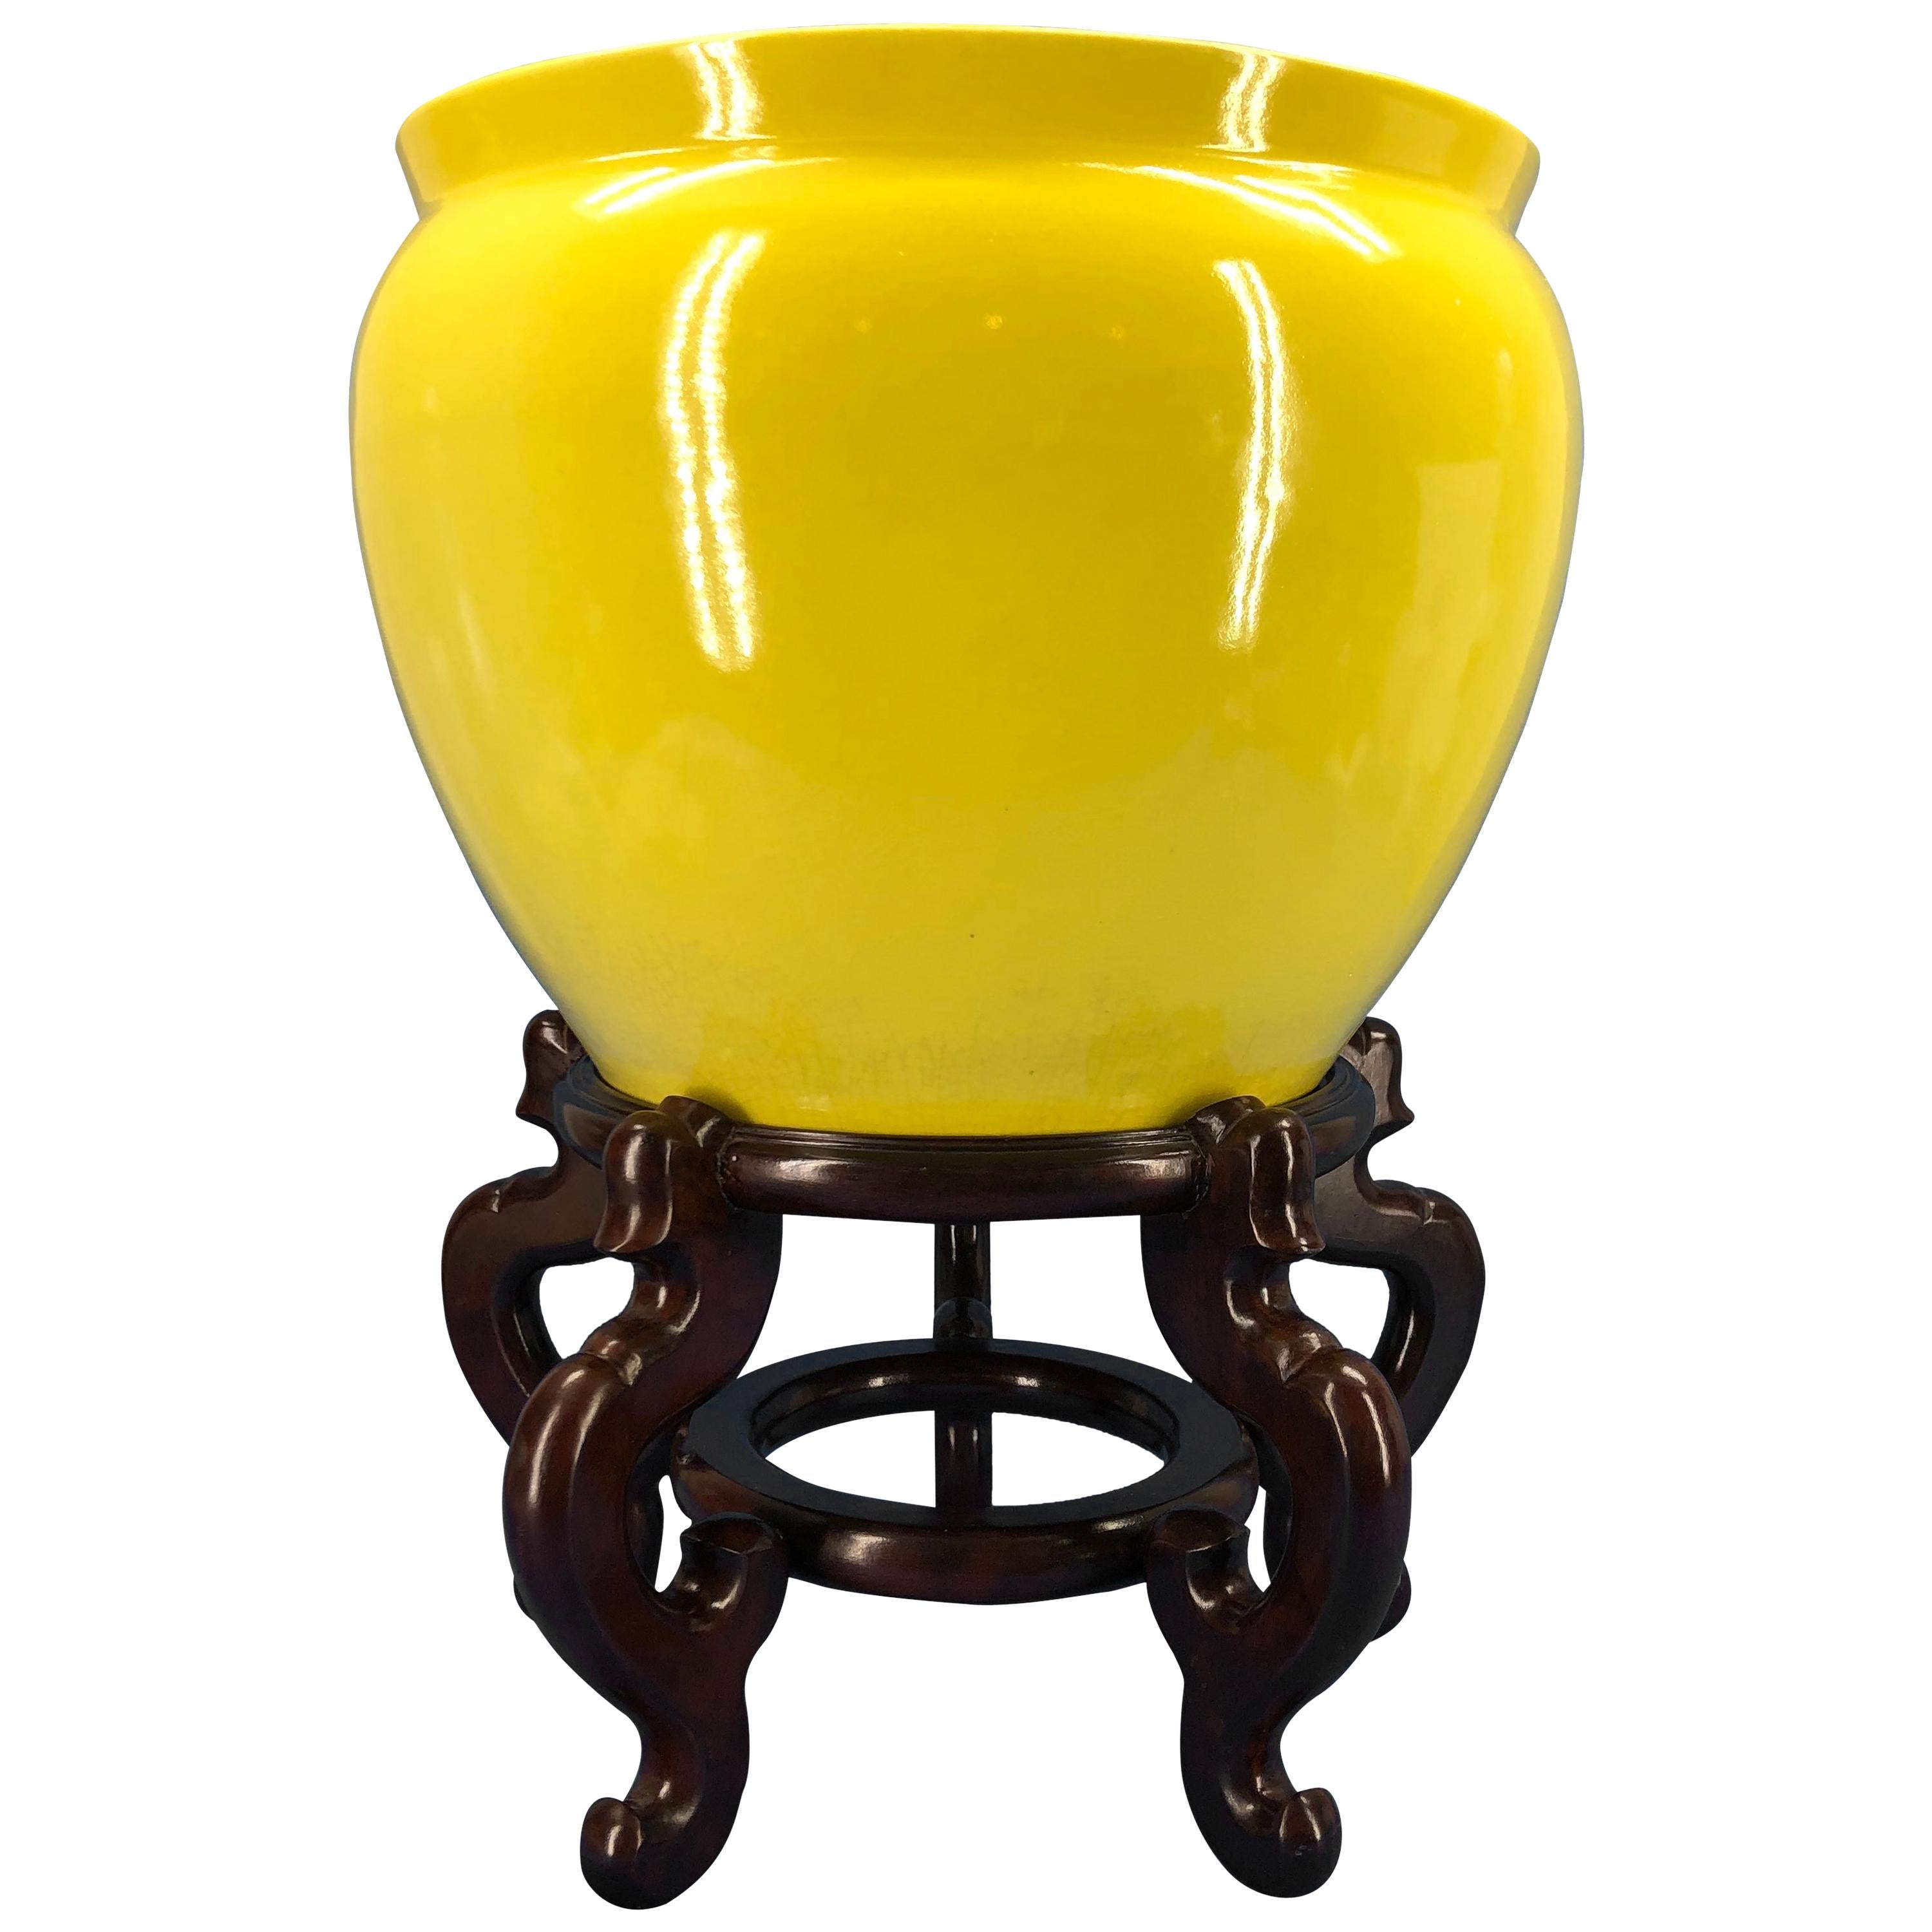 Large Bright Yellow Hand Painted Porcelain Jardinière Bowl on a Wooden Stand